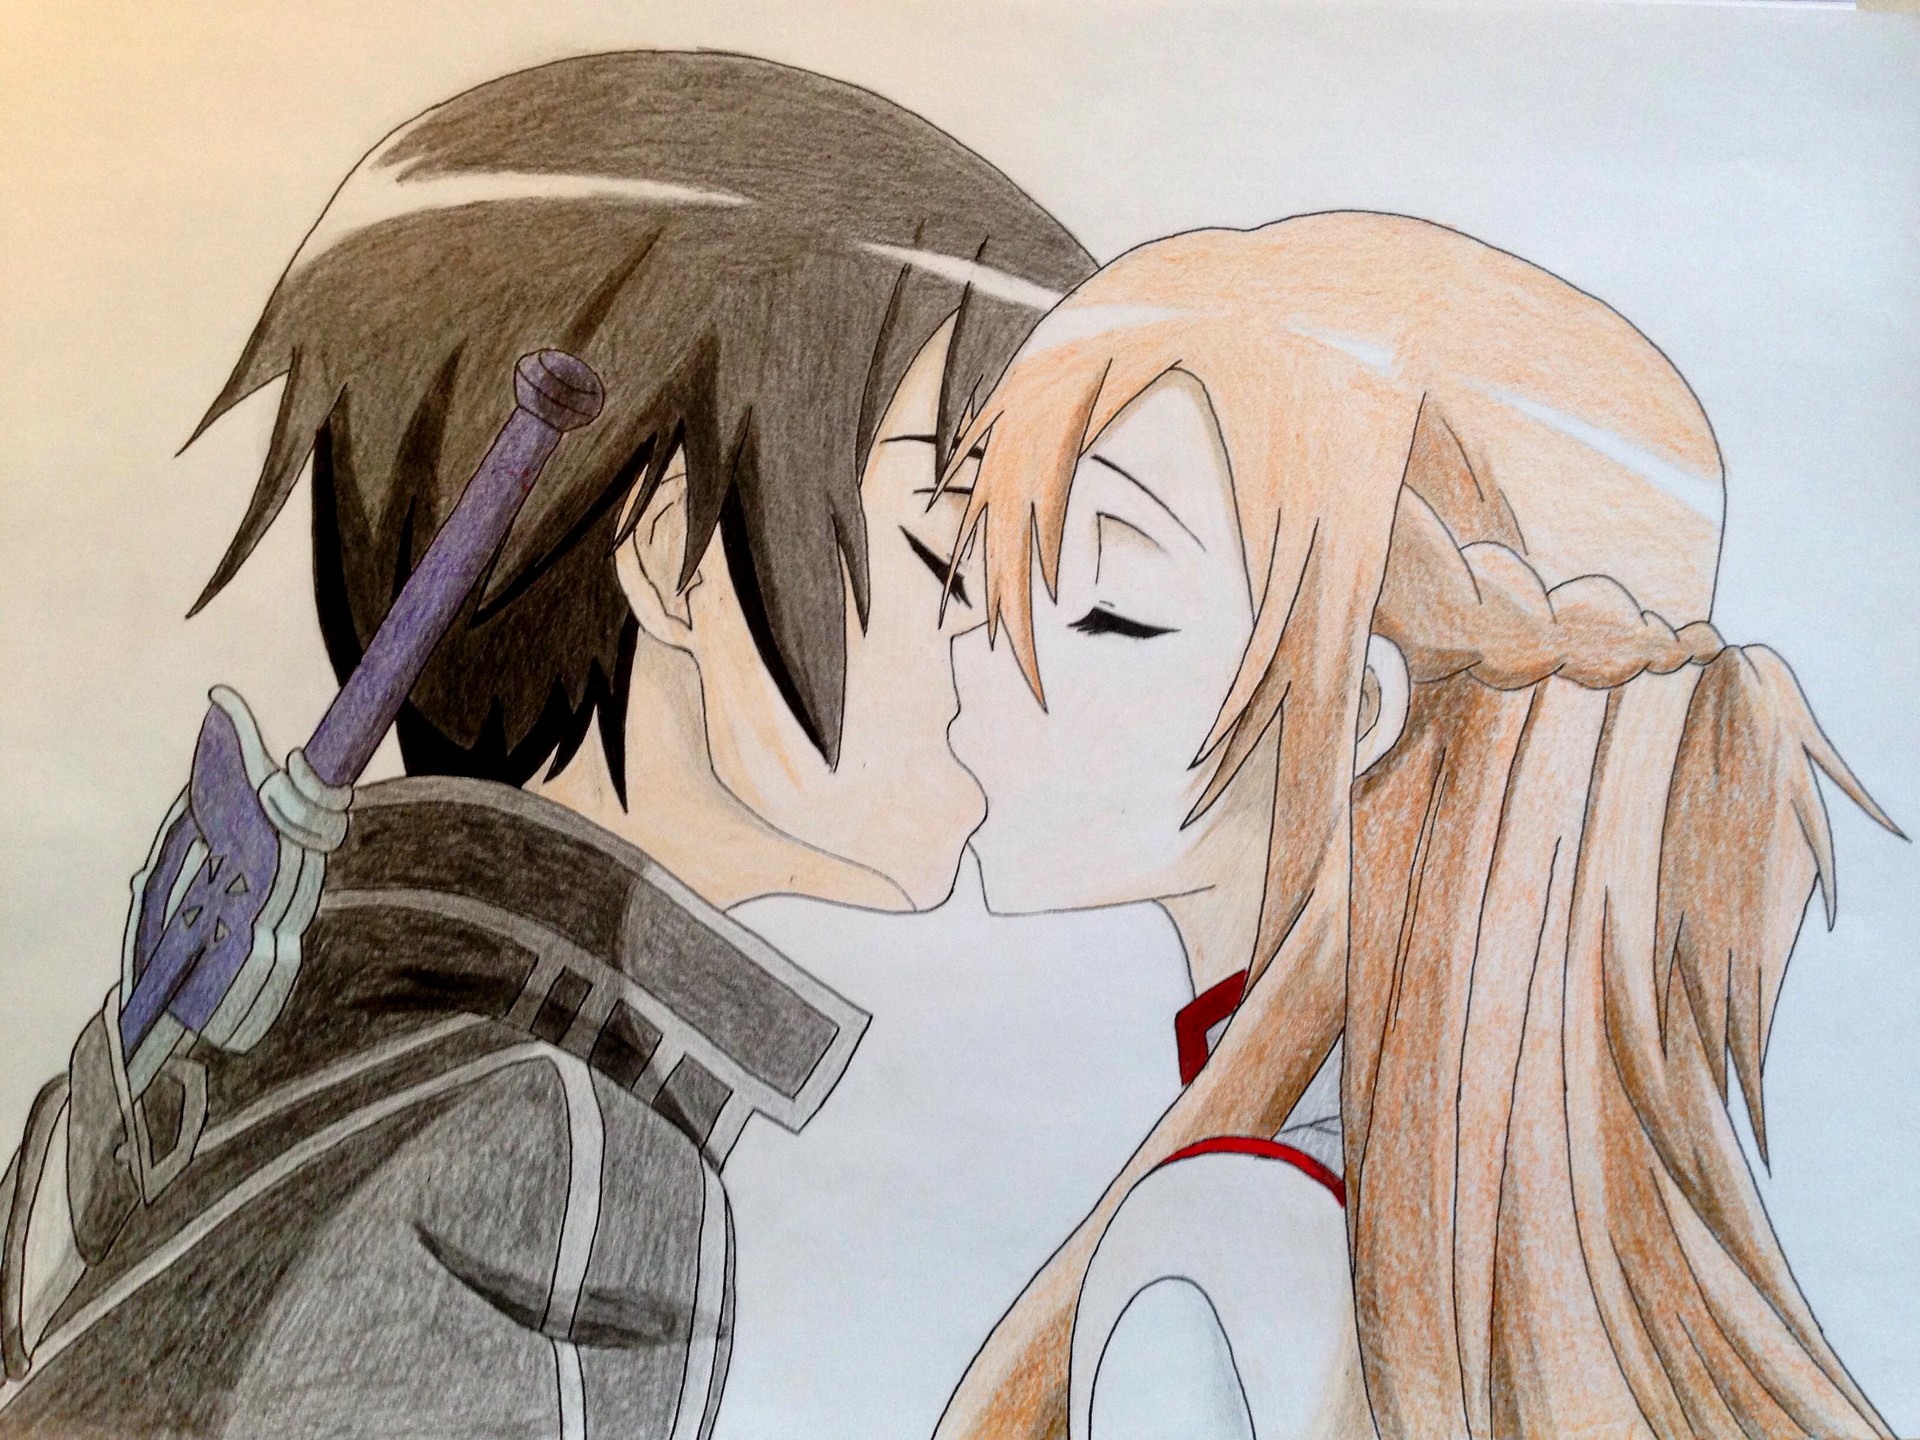 7. "Kirito and Asuna from Sword Art Online" - wide 8